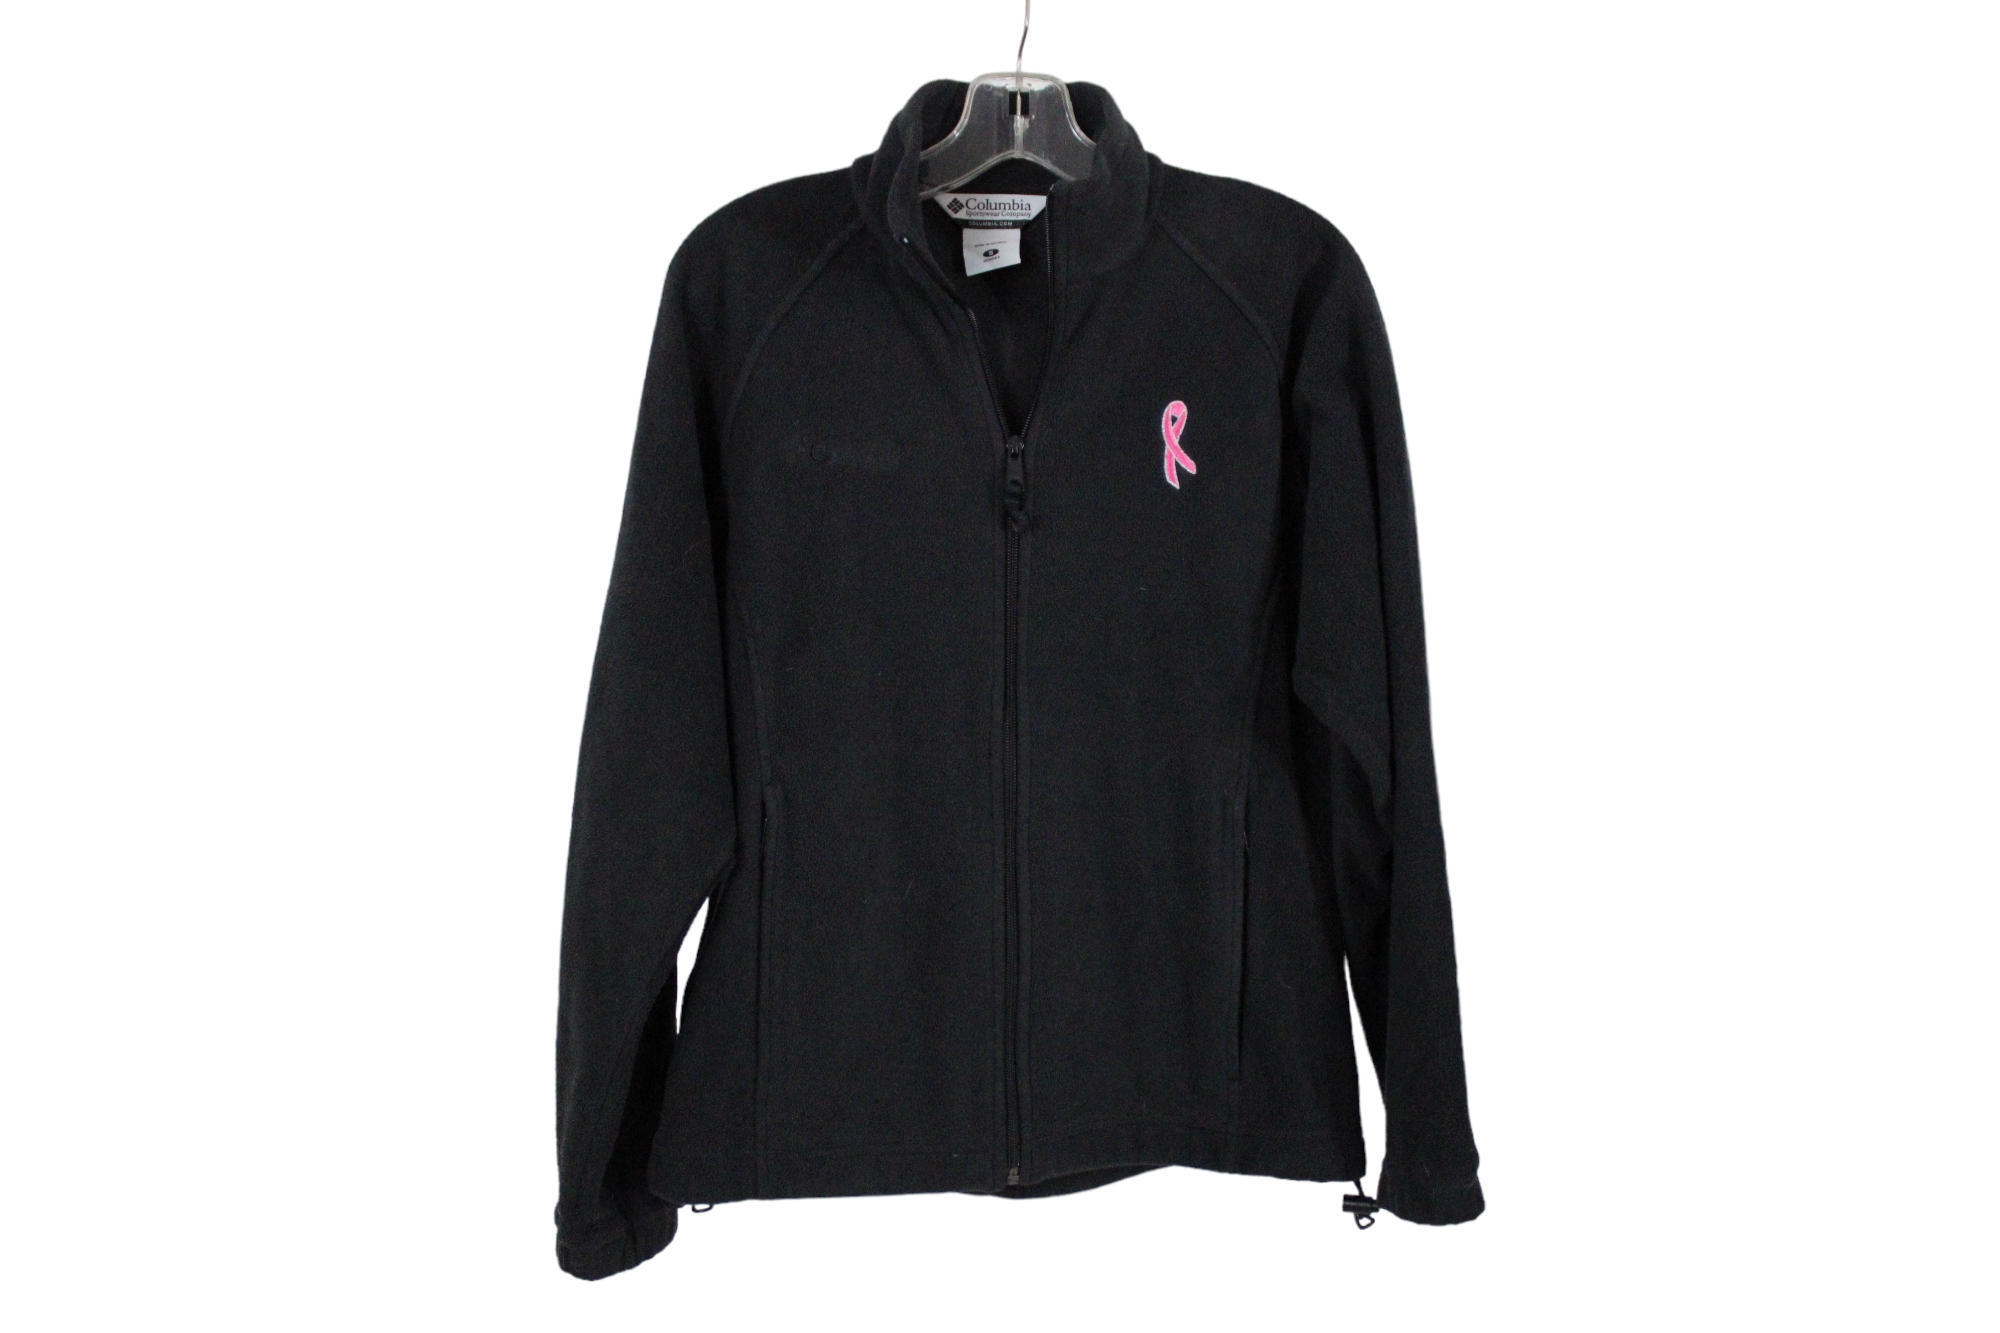 Fleece Pink Ribbons Breast Cancer Awareness Ribbons on Black and